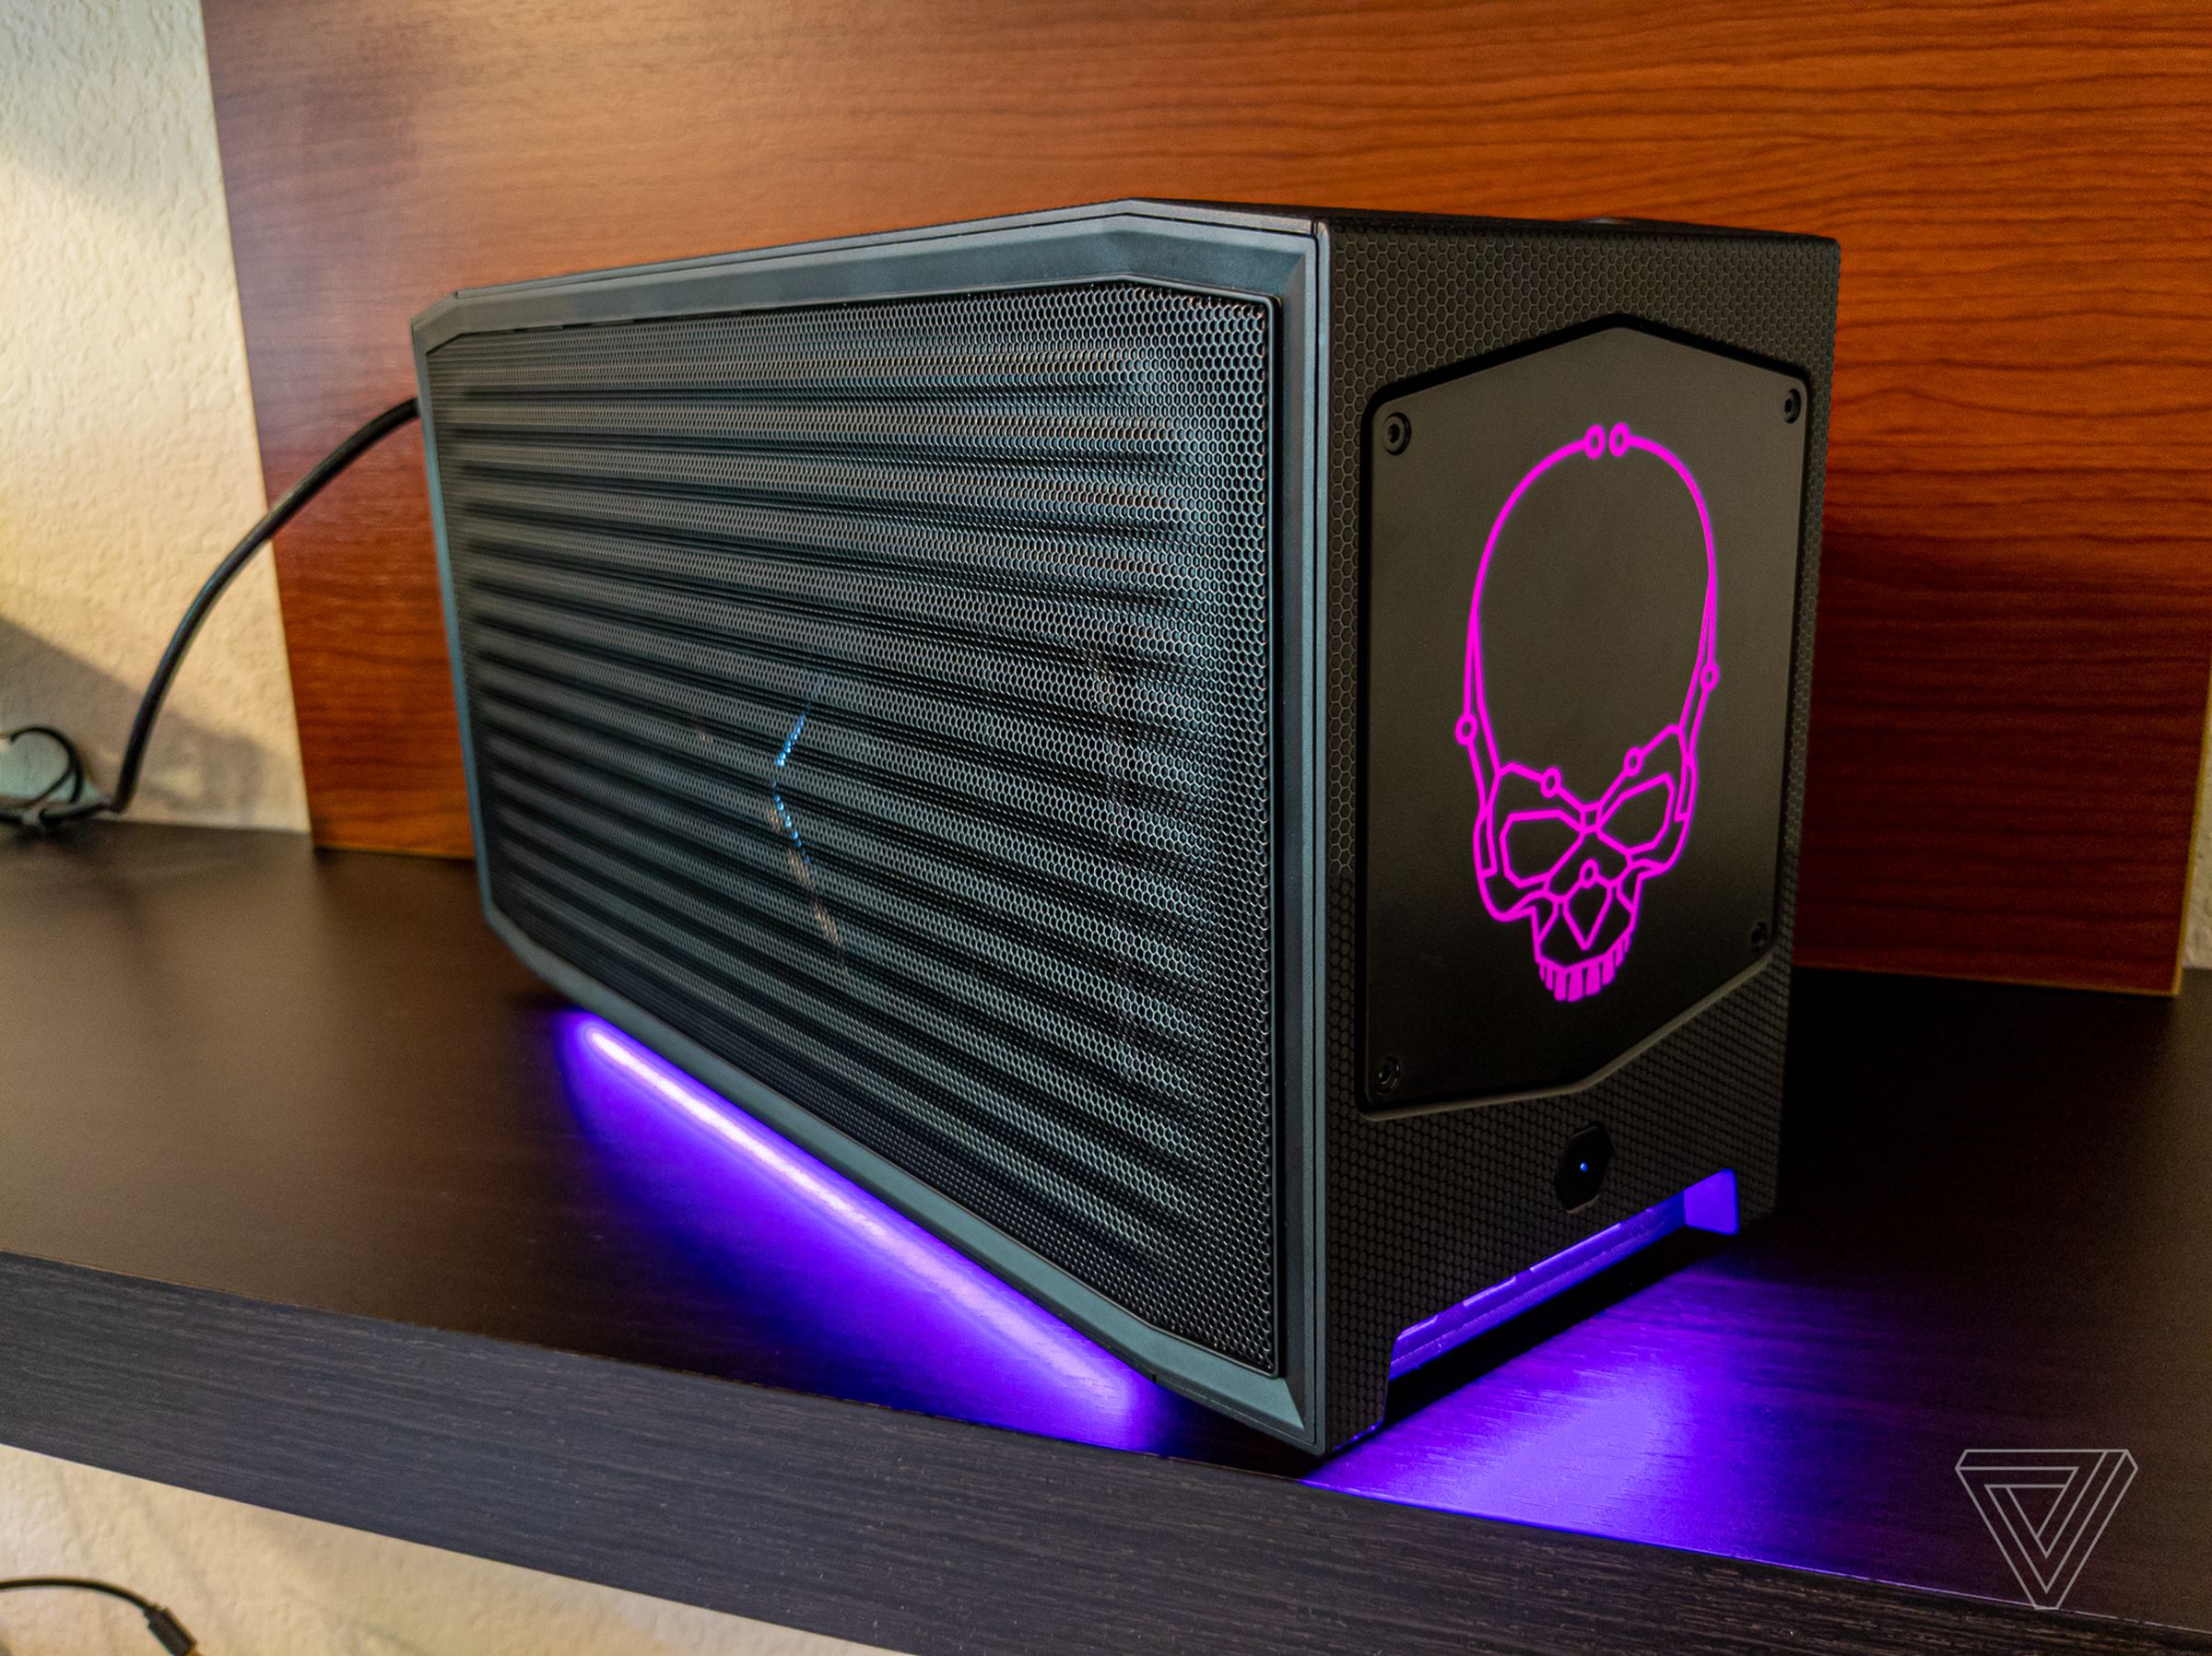 <em>Intel’s NUC 11 Extreme, aka Beast Canyon. You can turn off the lighting, or print out a different pattern instead of a skull if you prefer.</em>